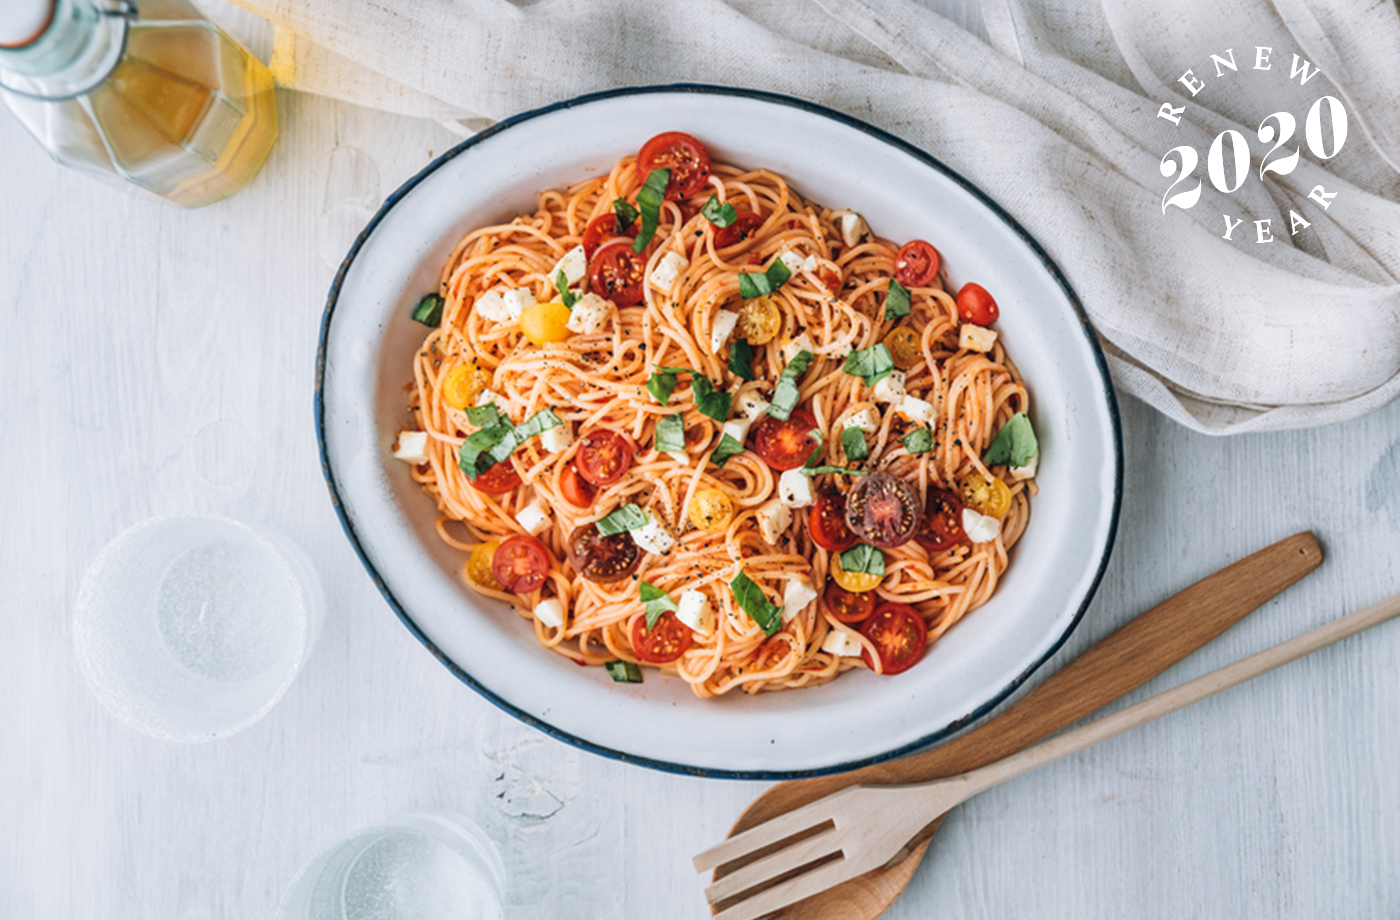 This easy, no-sugar-added marinara sauce will make every pasta night healthy *and* delicious